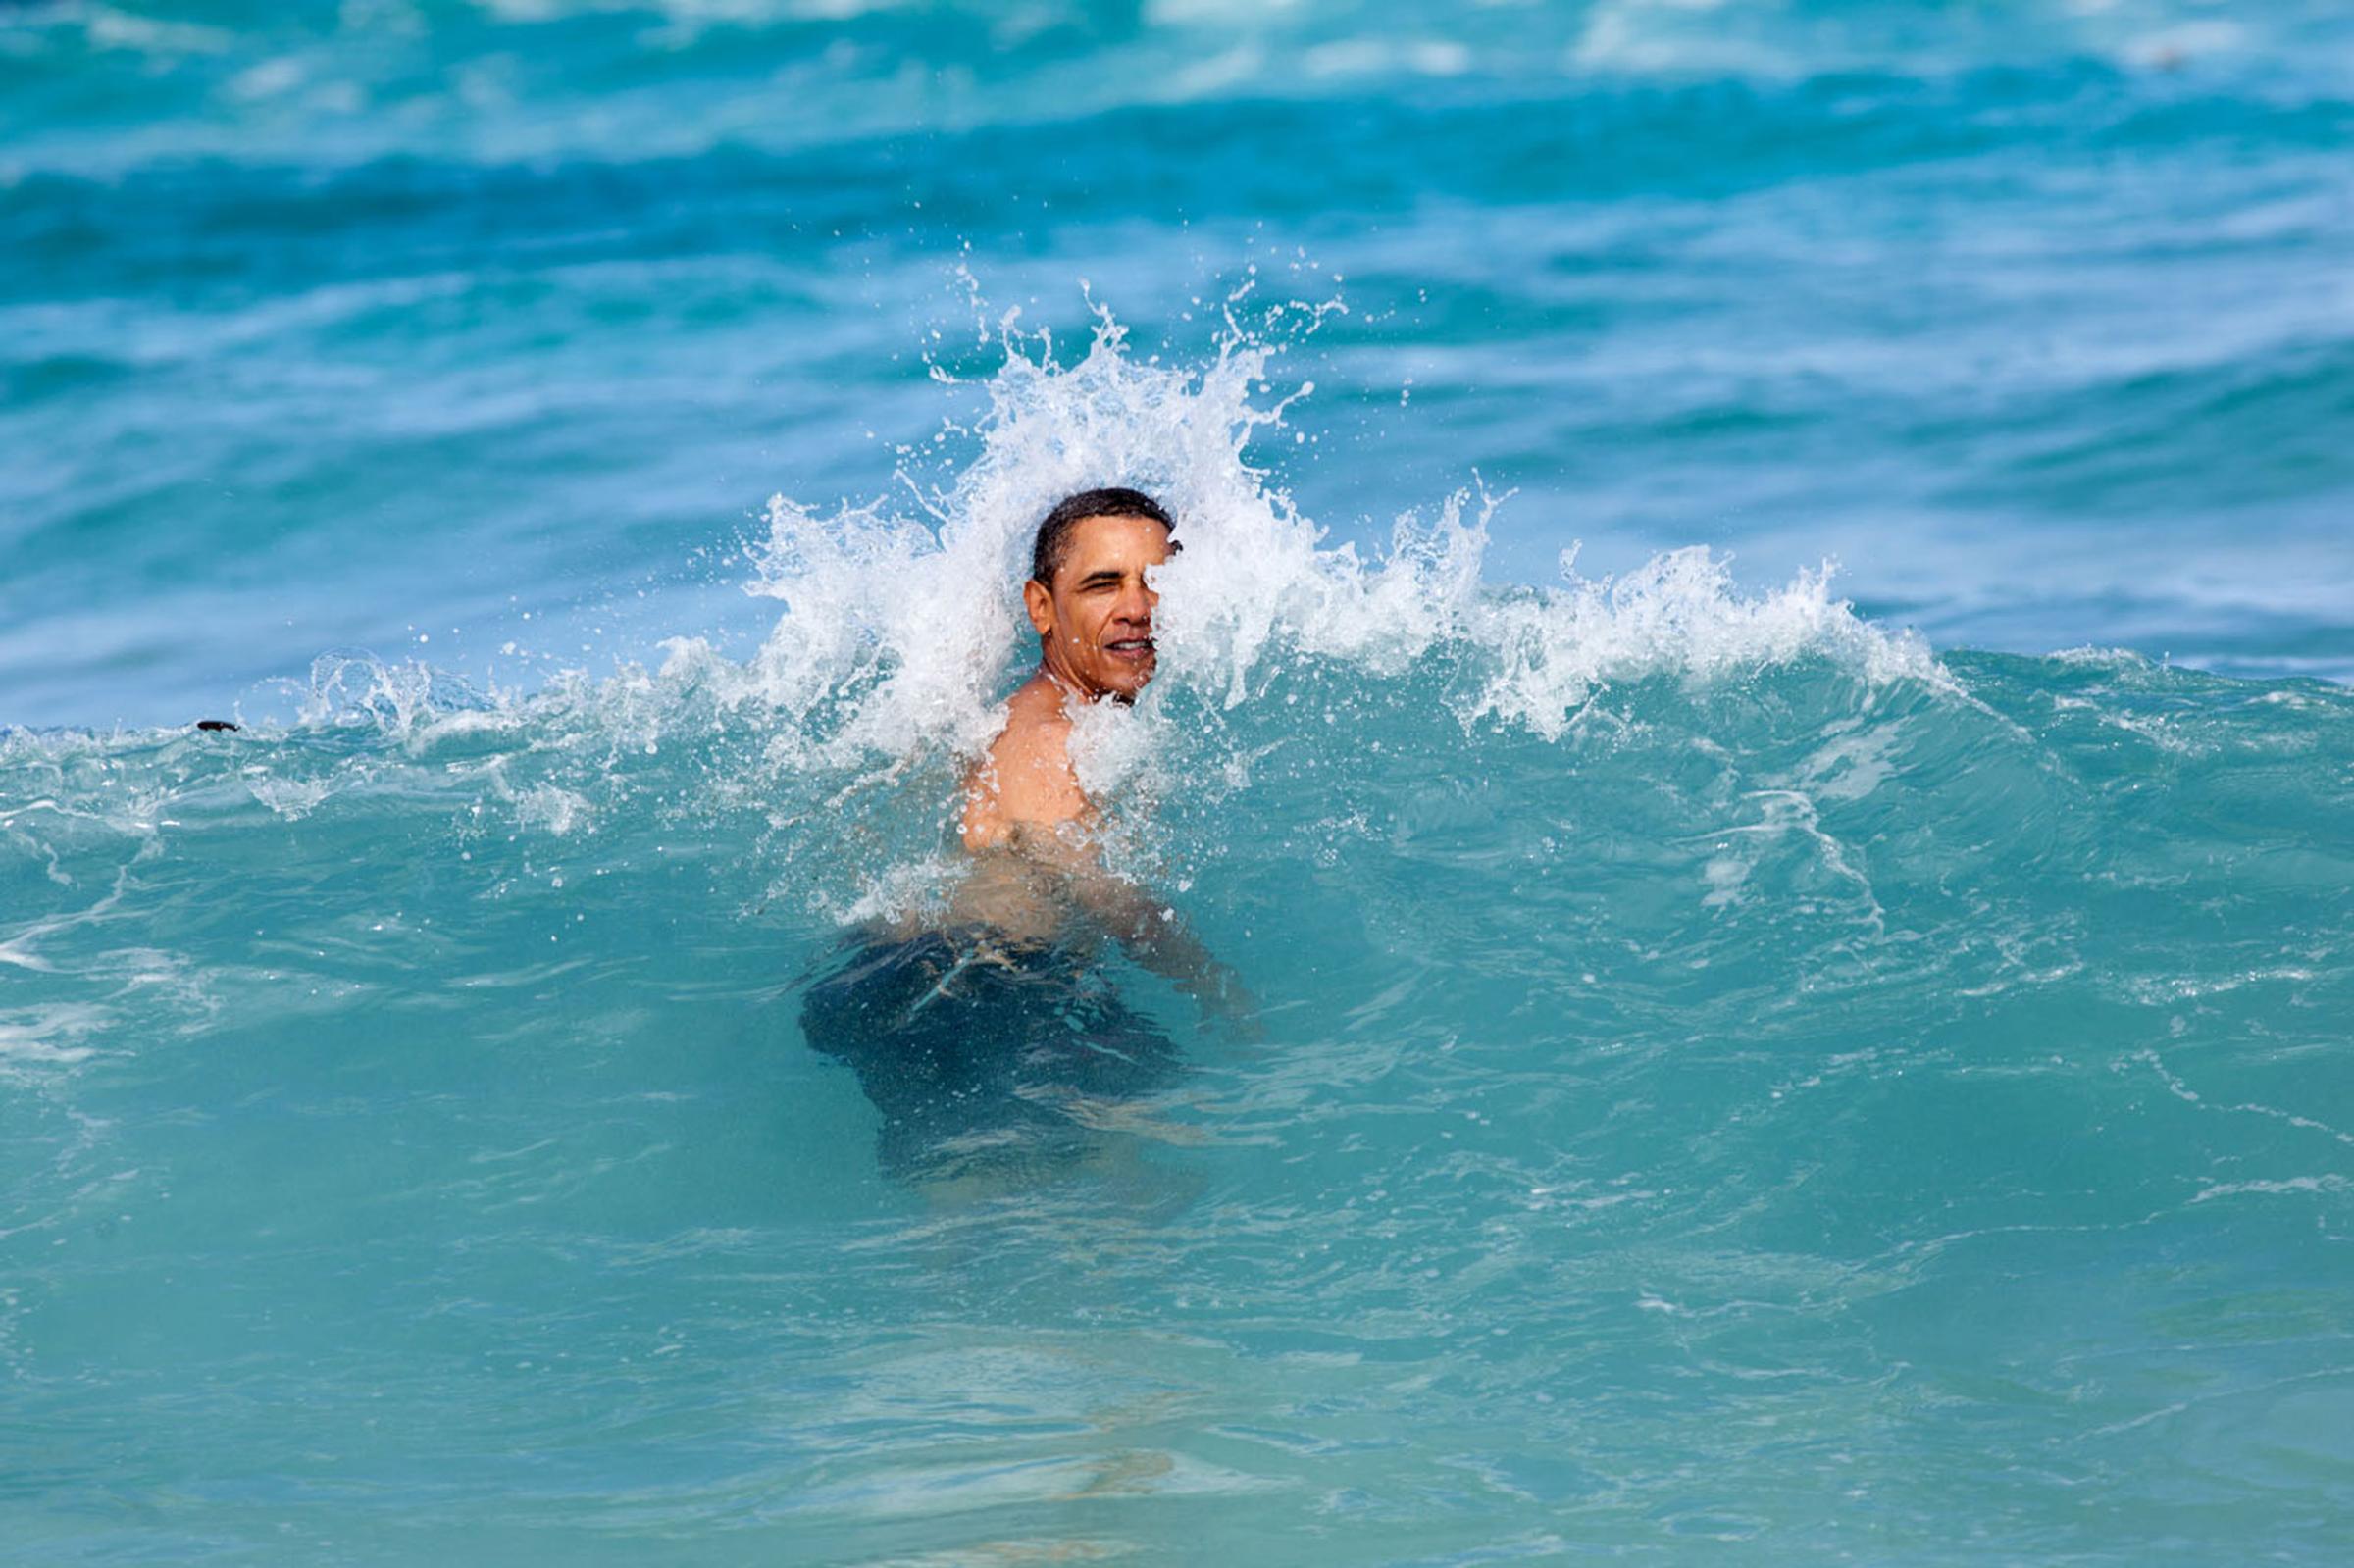 "A nice way to celebrate the New Year for the President was to jump in the ocean in his native state of Hawaii. He was on his annual Christmas vacation with family and friends, and went swimming at Pyramid Rock Beach in Kaneohe Bay,"Jan. 1, 2012.